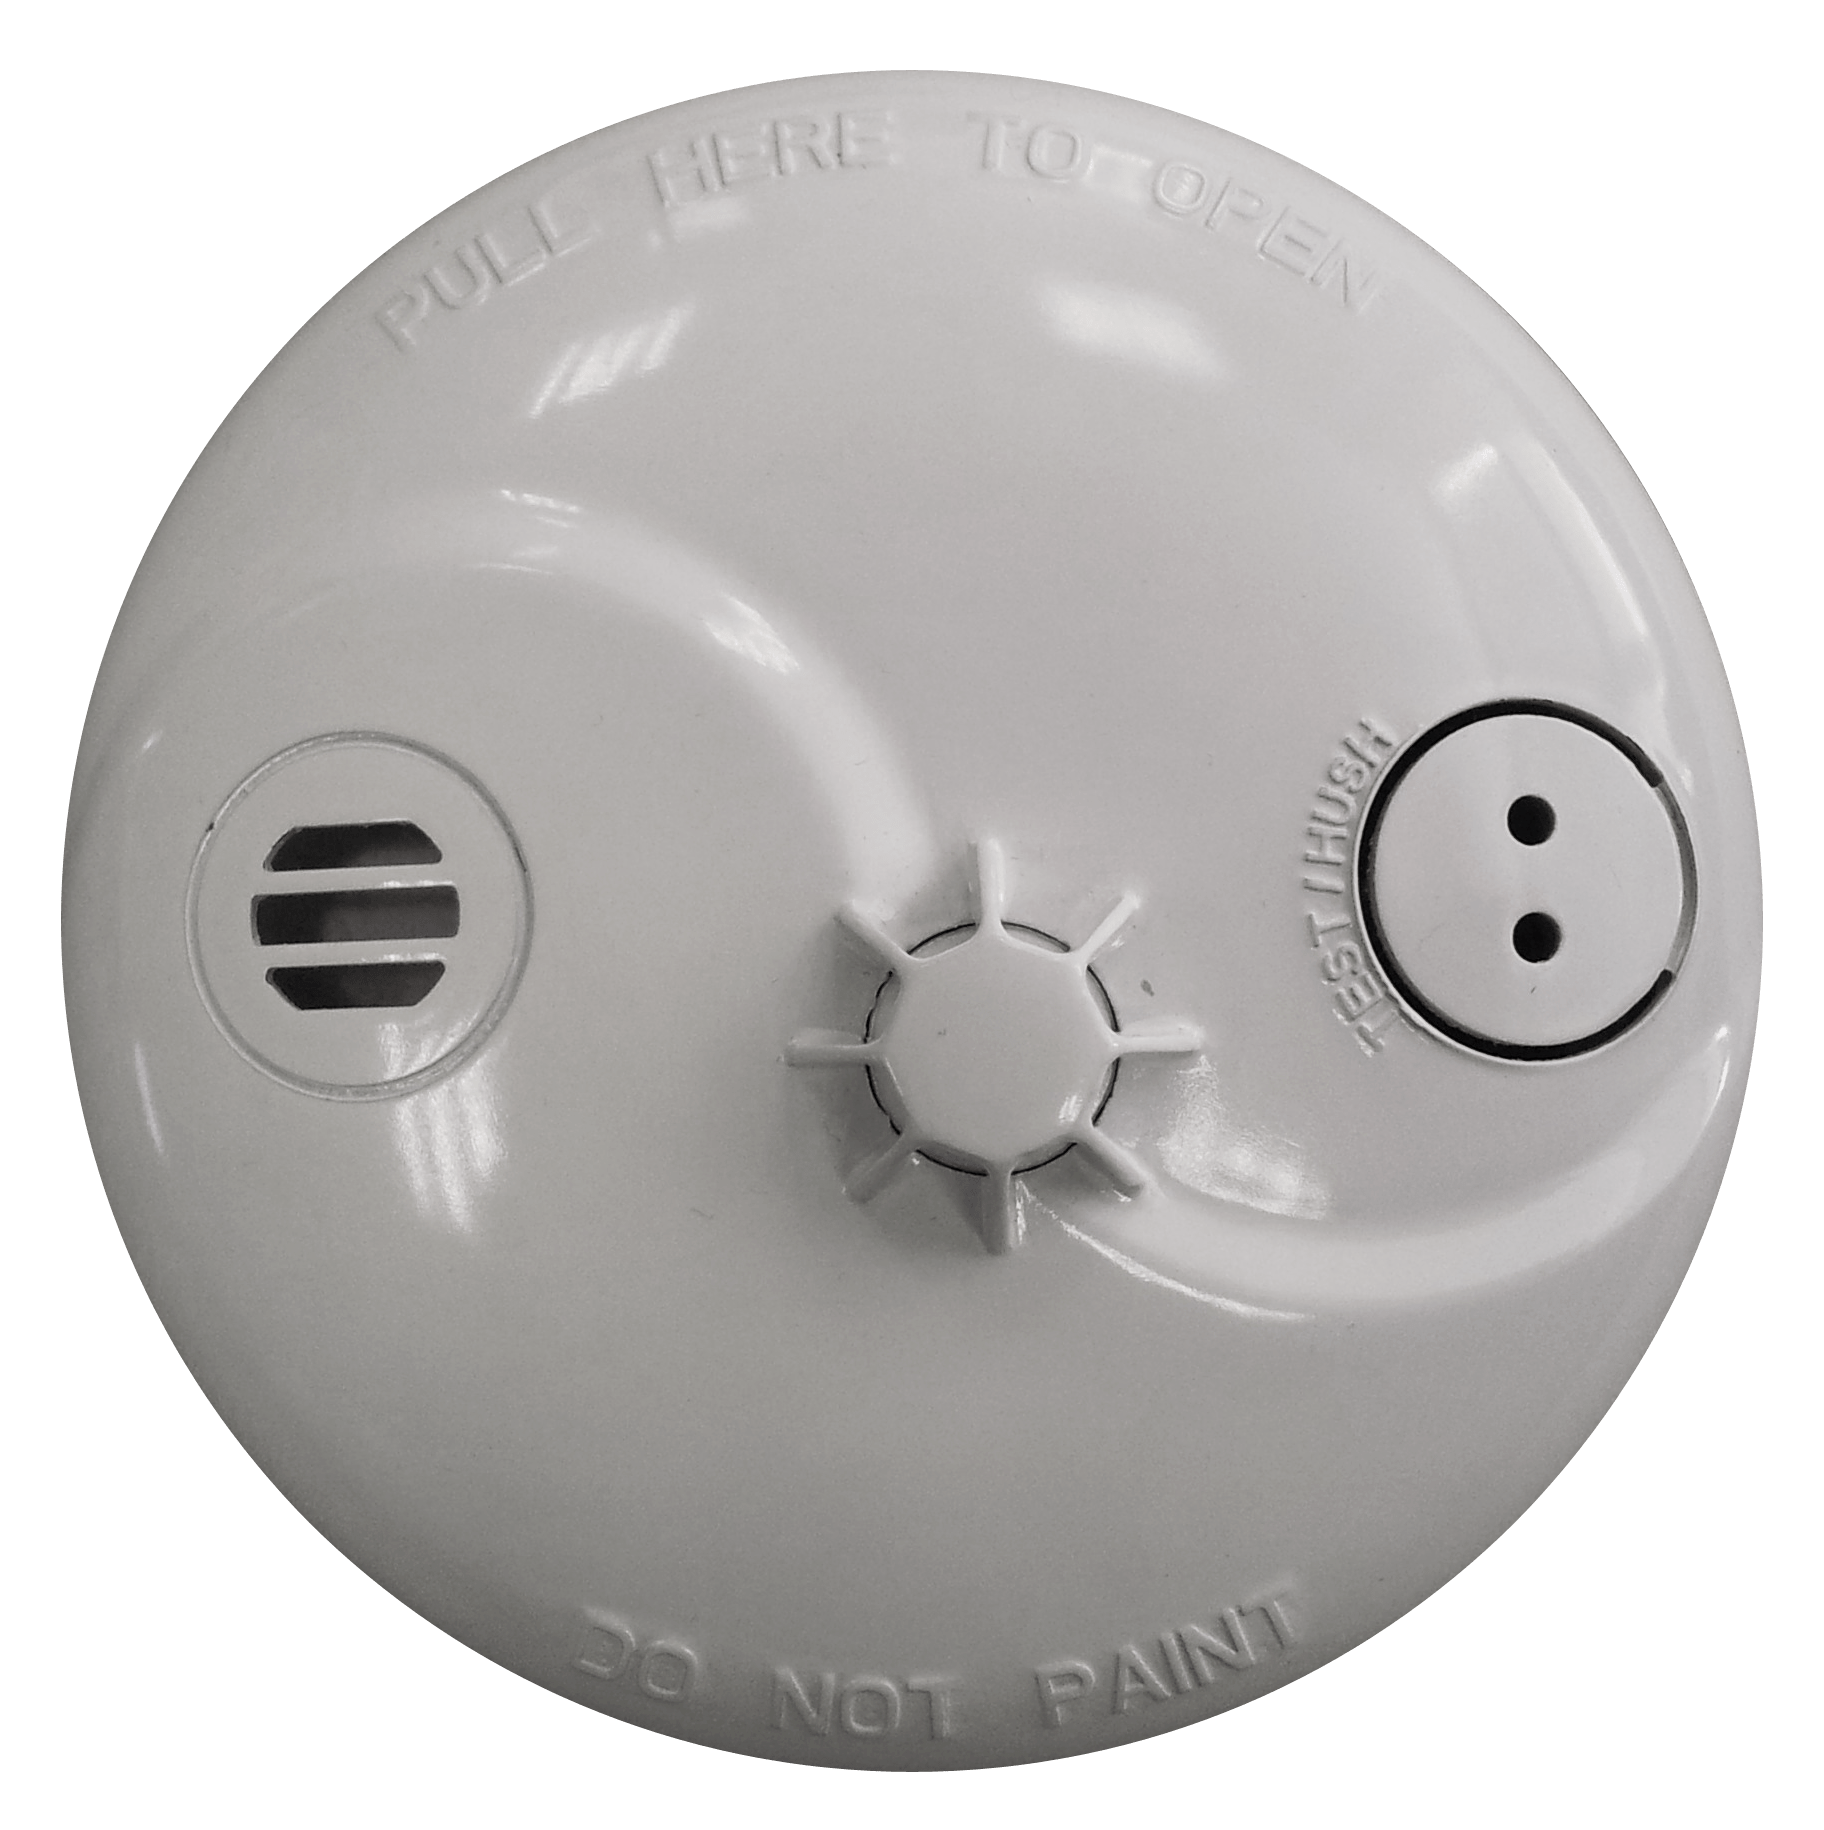 This reliable heat detector operates on mains power, providing continuous monitoring of temperature changes and alerting you to potential fire hazards. Find it at Supply Master in Accra, Ghana Fire Safety Equipment Buy Tools hardware Building materials